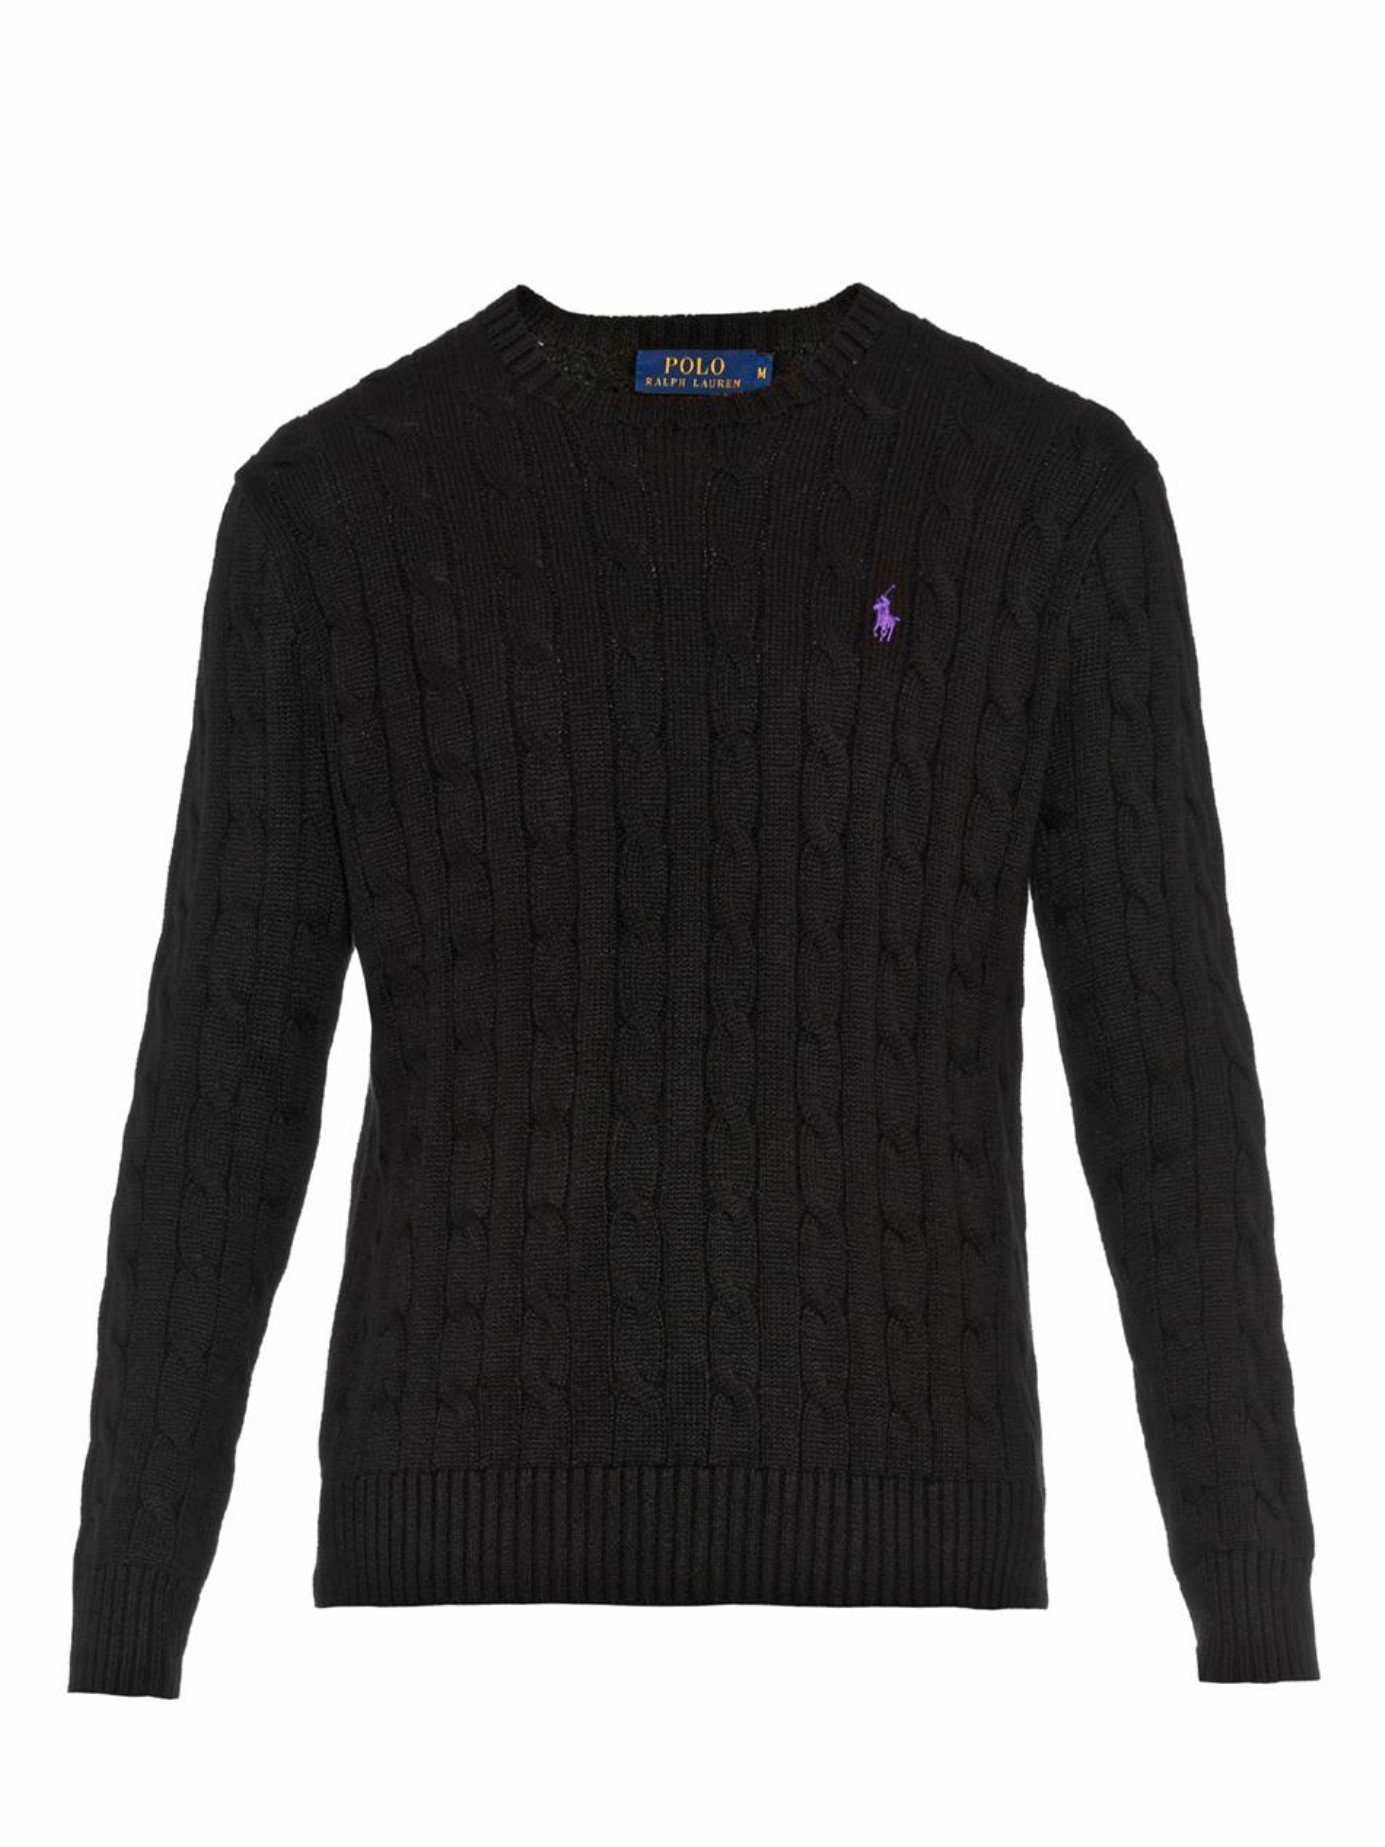 Polo ralph lauren Cable-knit Cotton Sweater in Black for Men | Lyst